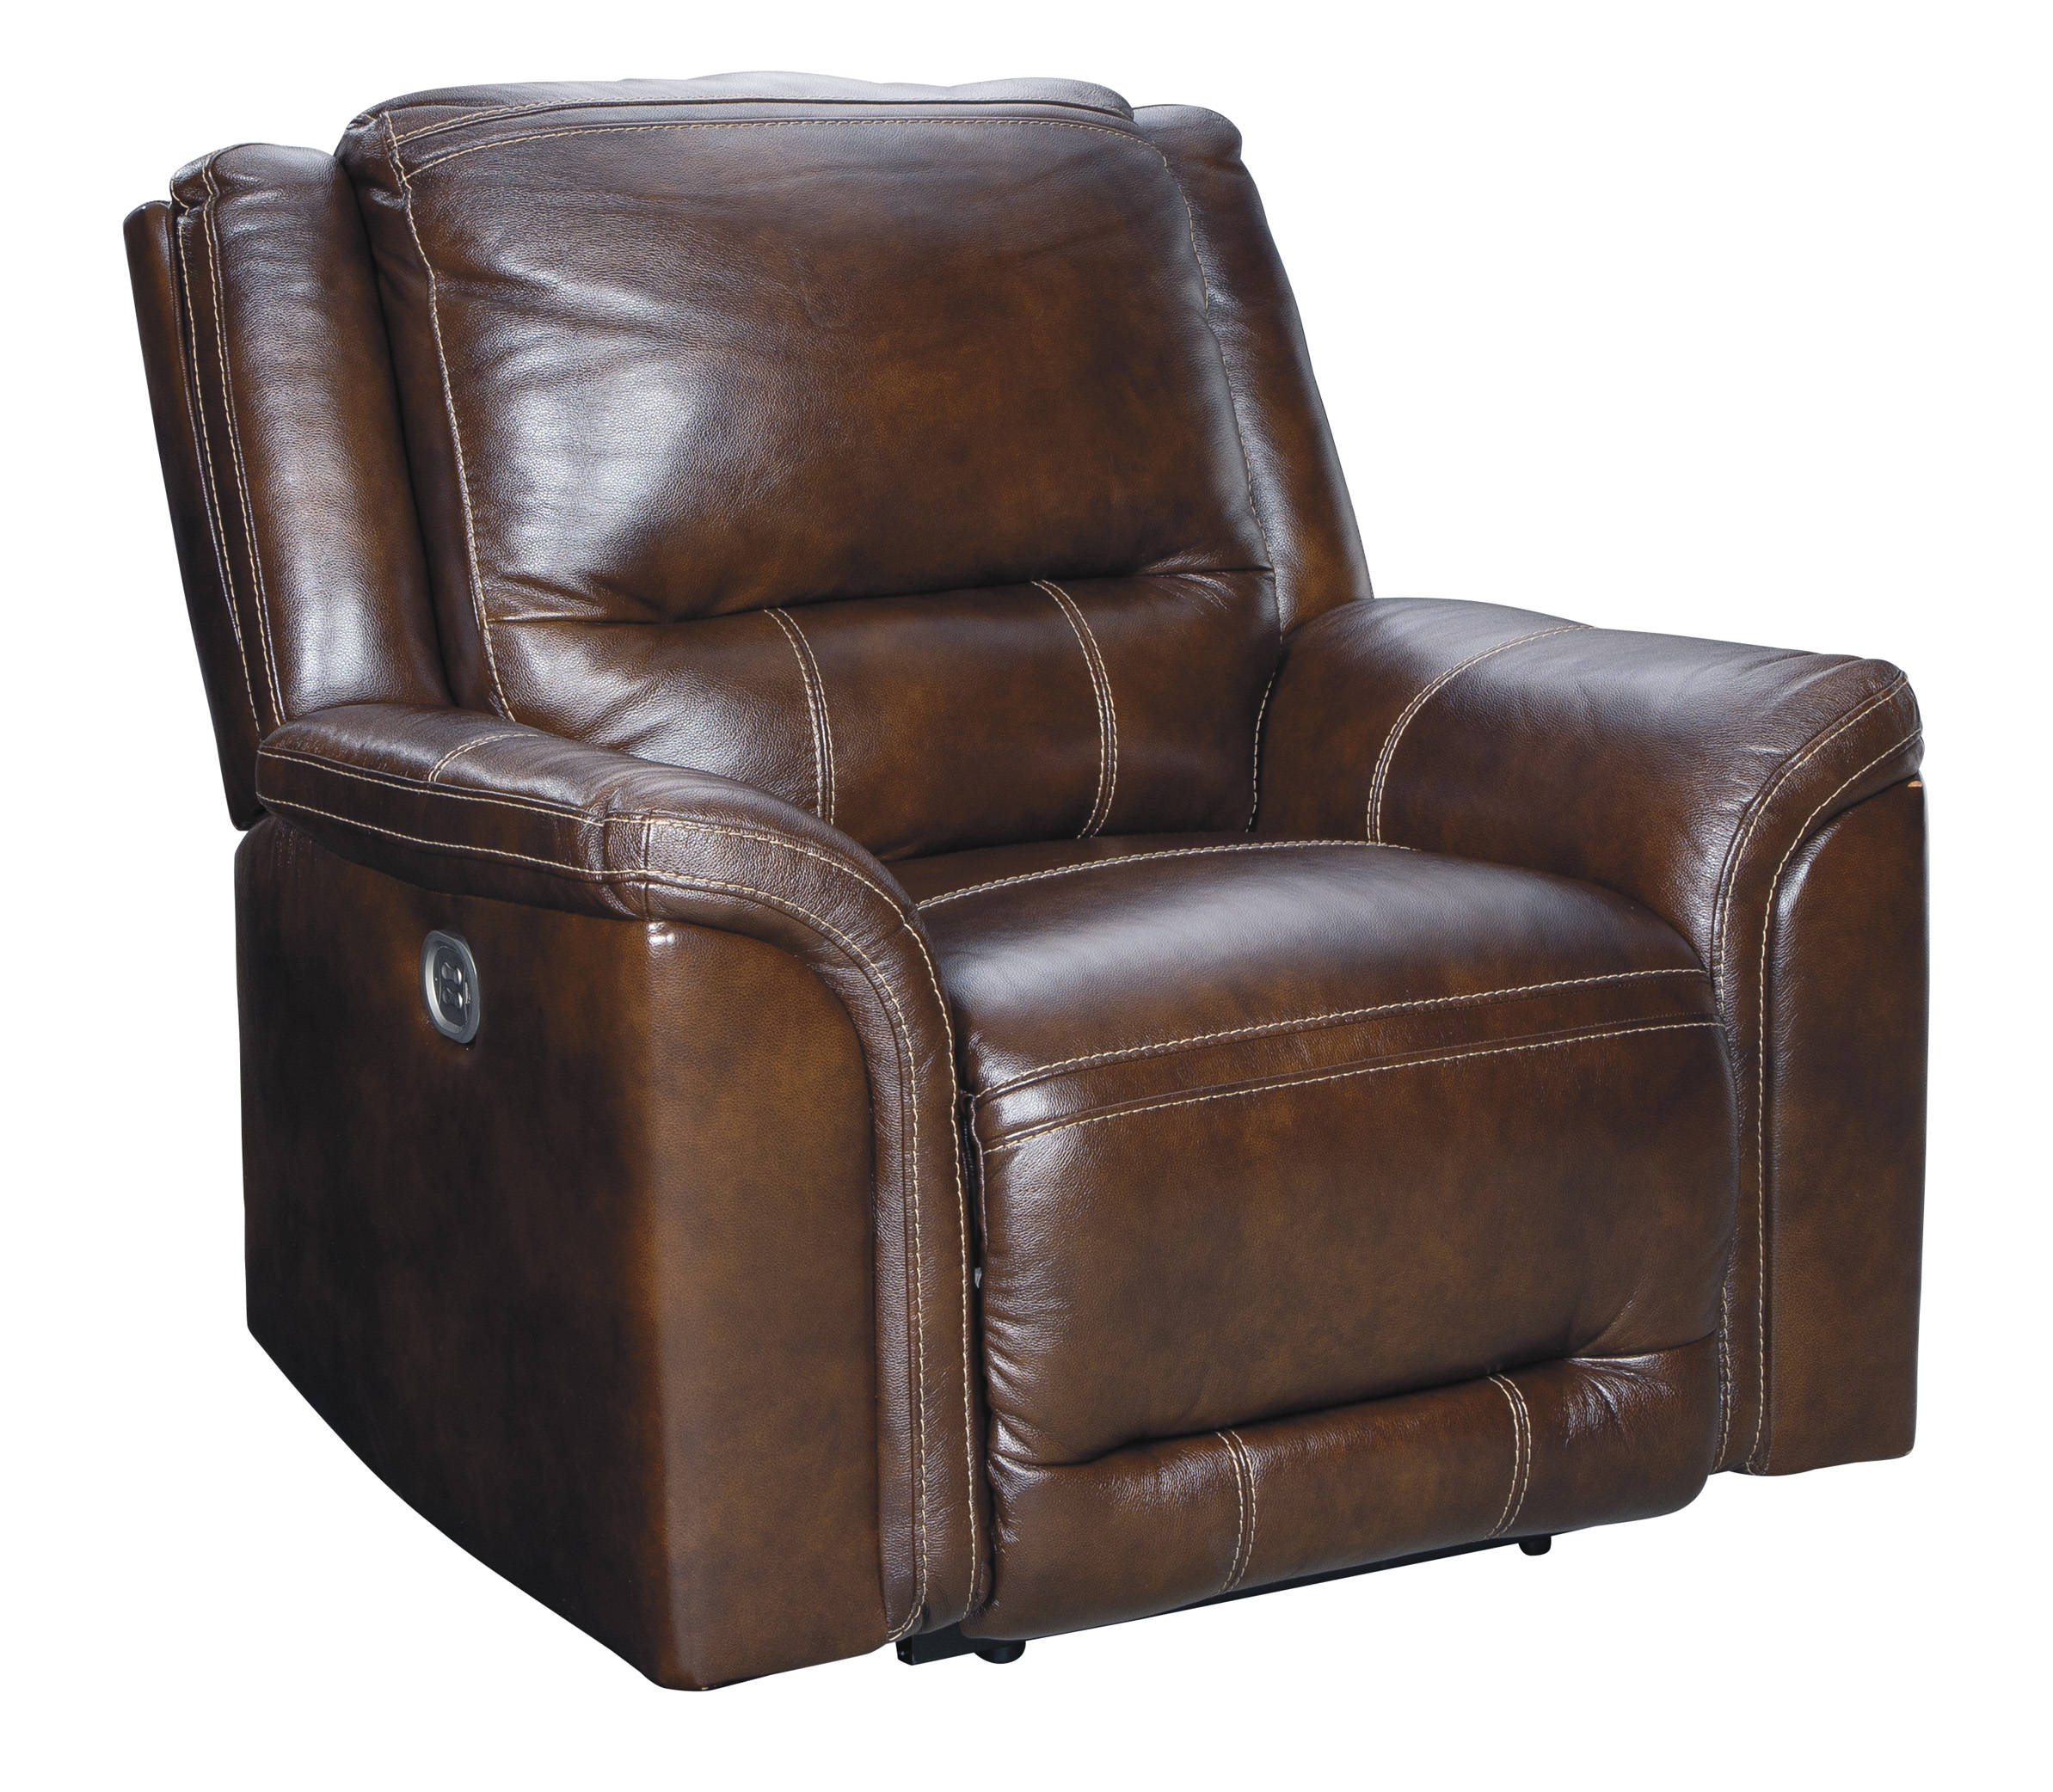 Top Grain Leather Recliner Visualhunt, All Leather Recliners